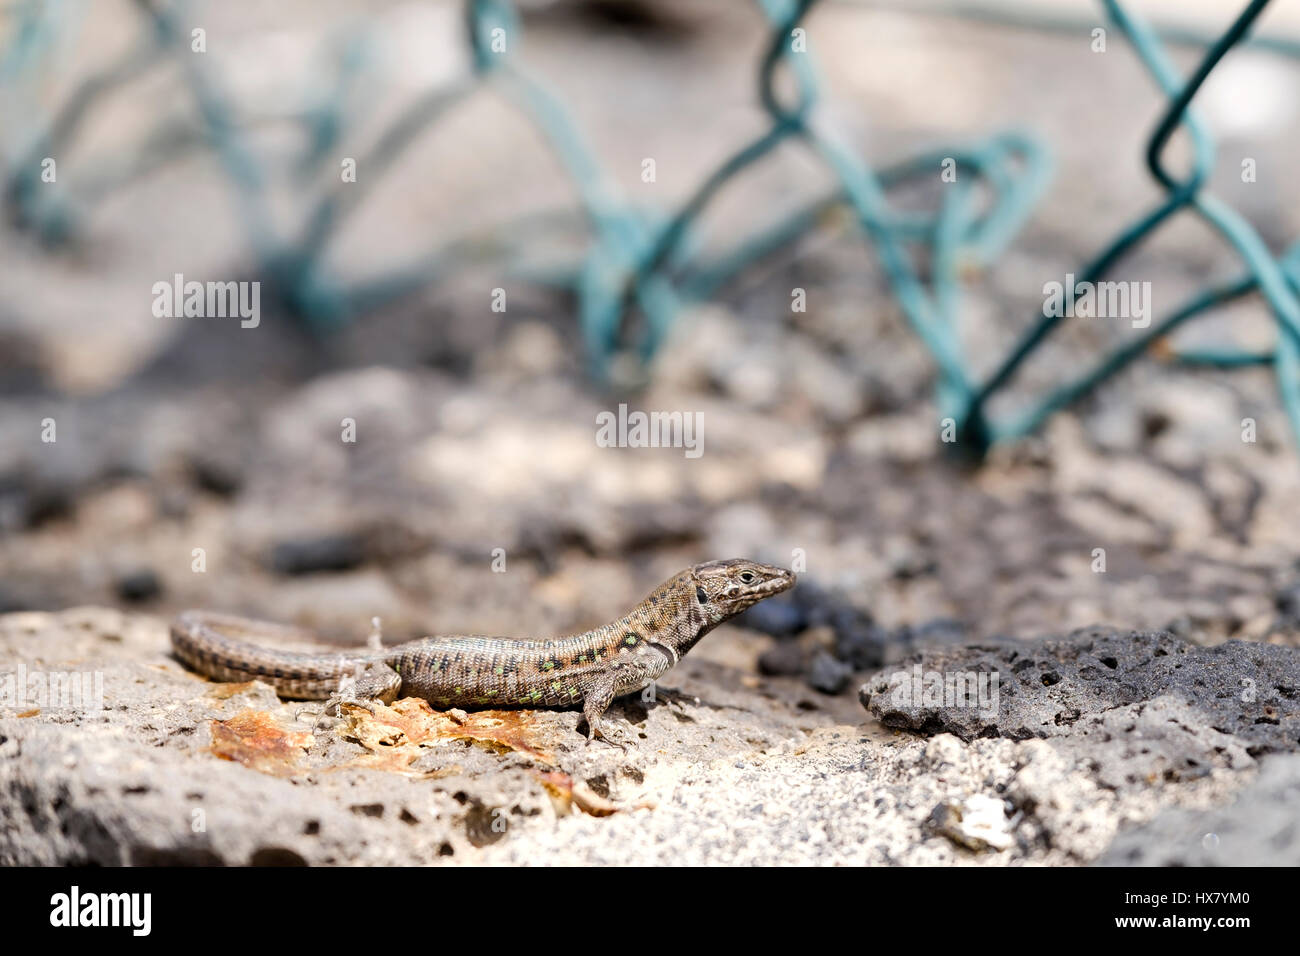 A Canary Islands, lanzarote wall lizard, gallotia, warming itself on a laza brick wall a twisted wire fence is out of focus in the background Stock Photo